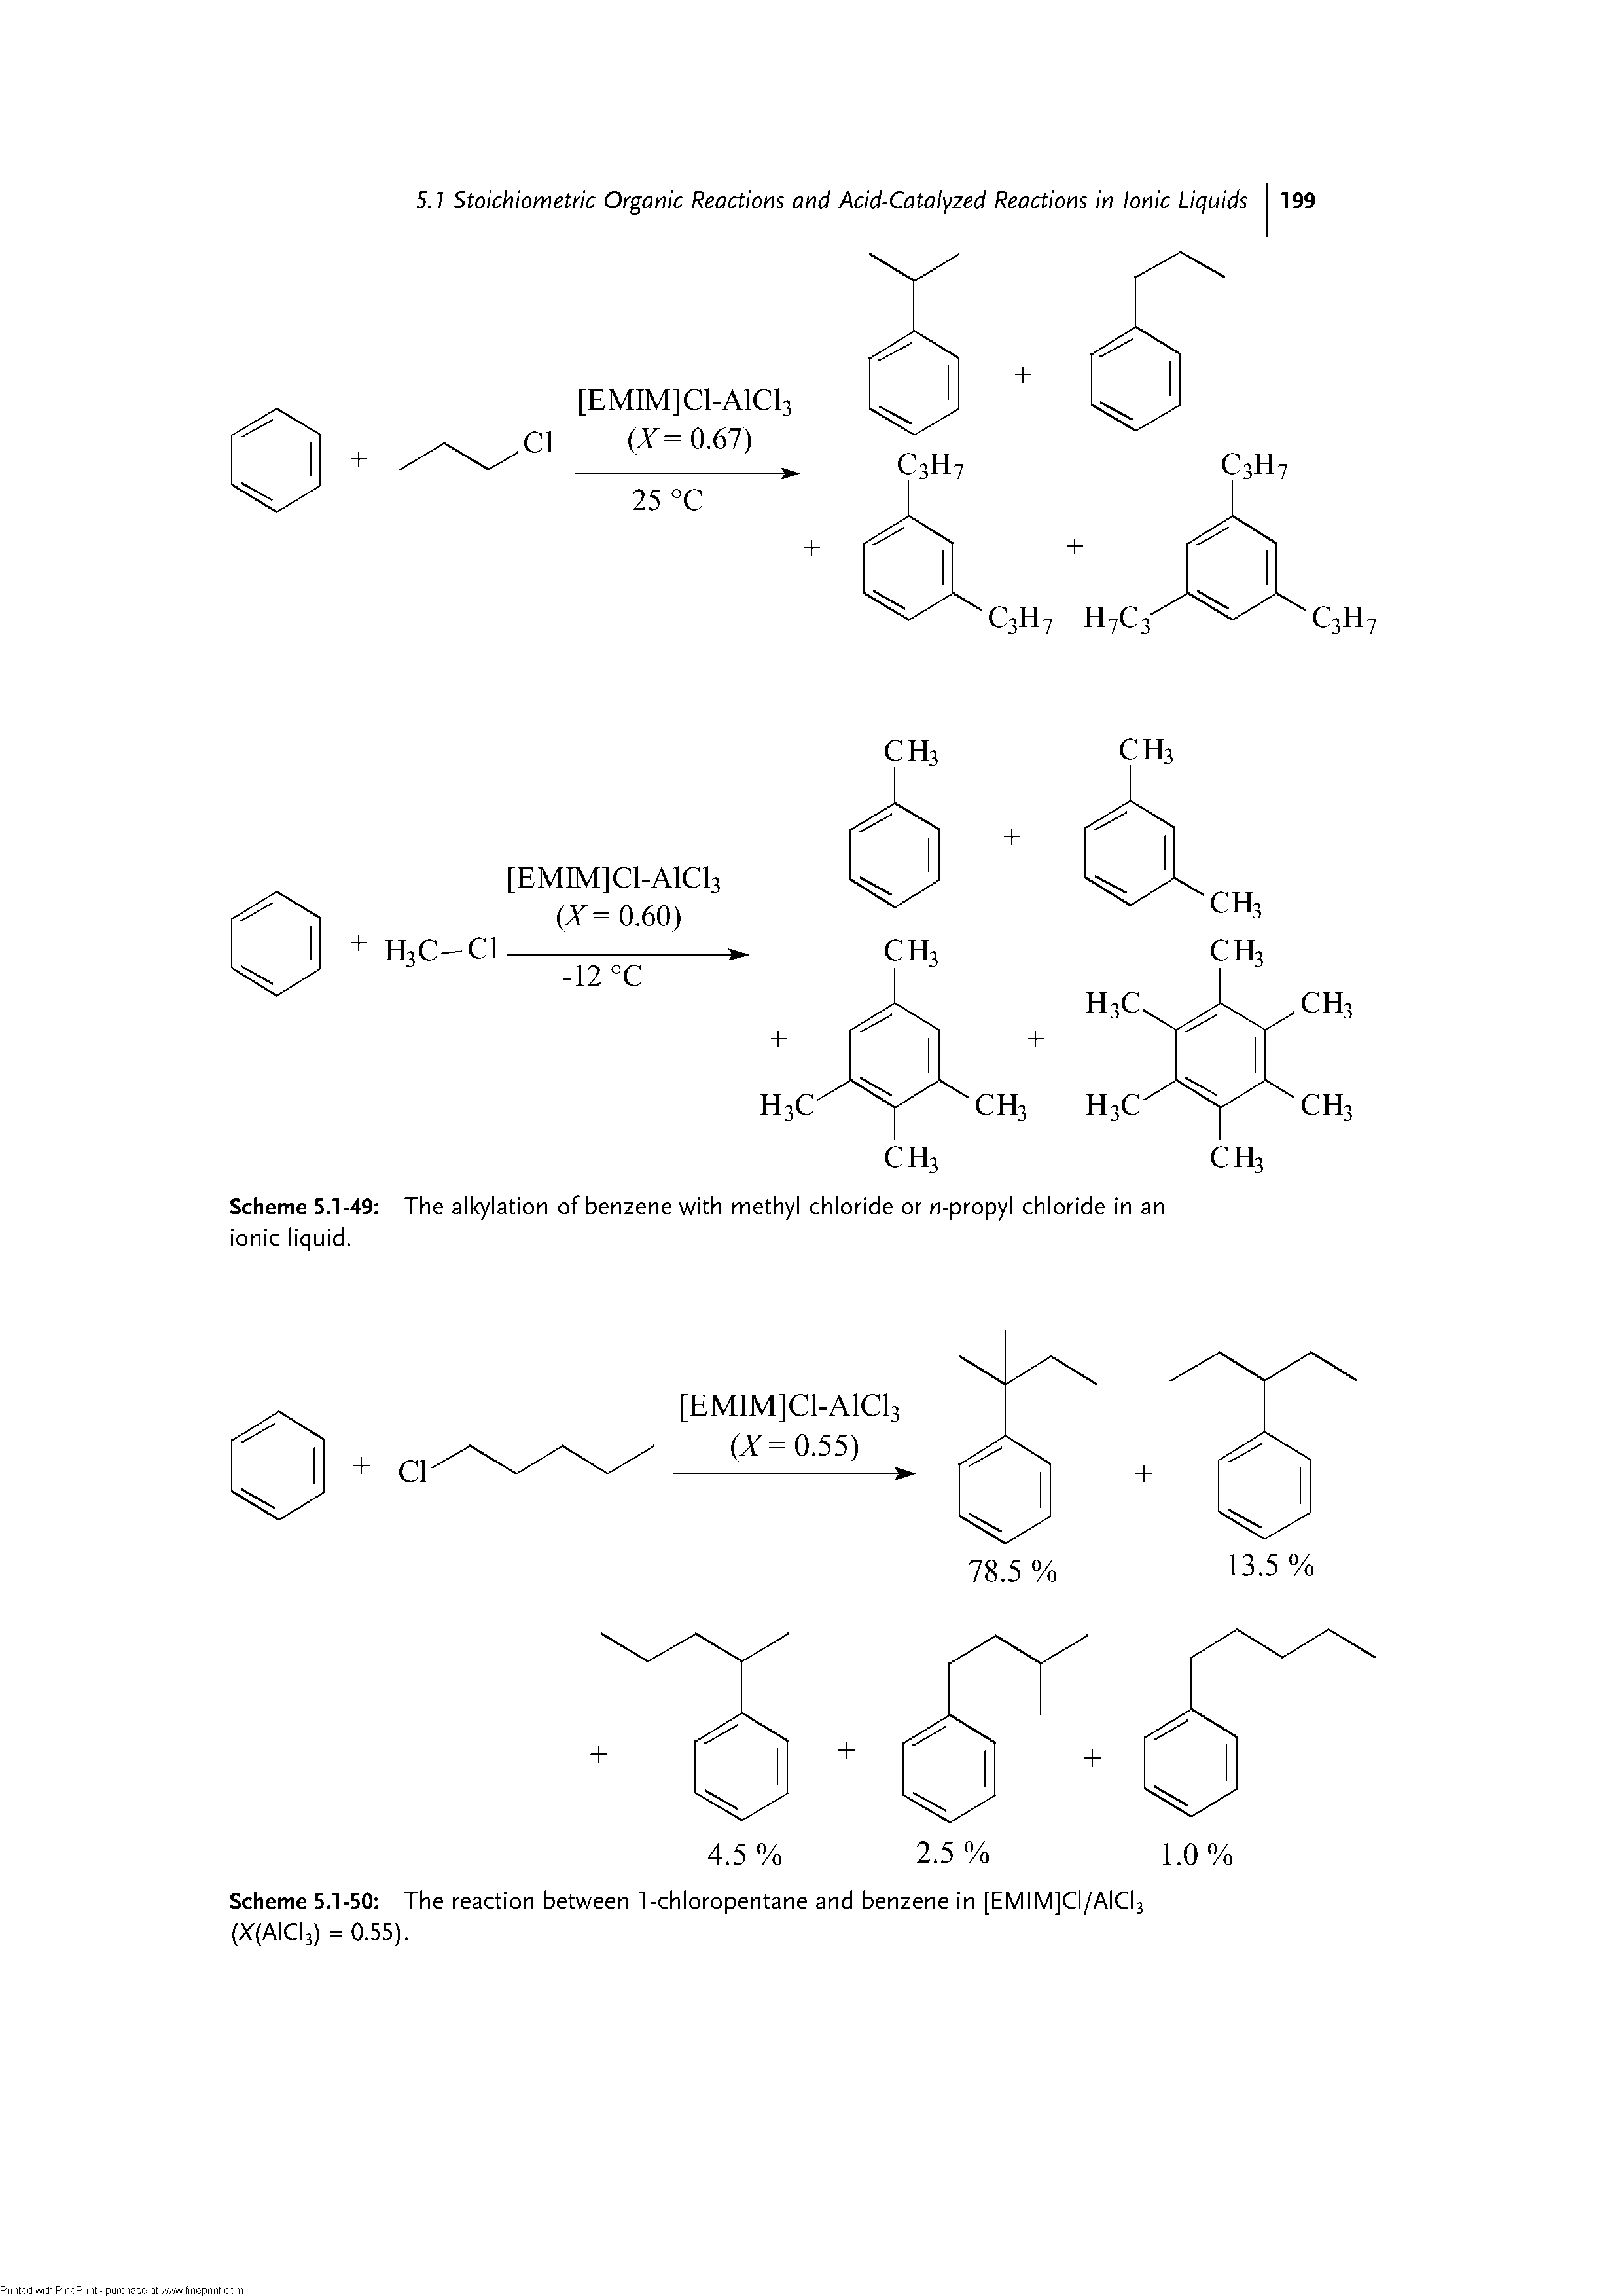 Scheme 5.1-49 The alkylation of benzene with methyl chloride or n-propyl chloride in an ionic liquid.